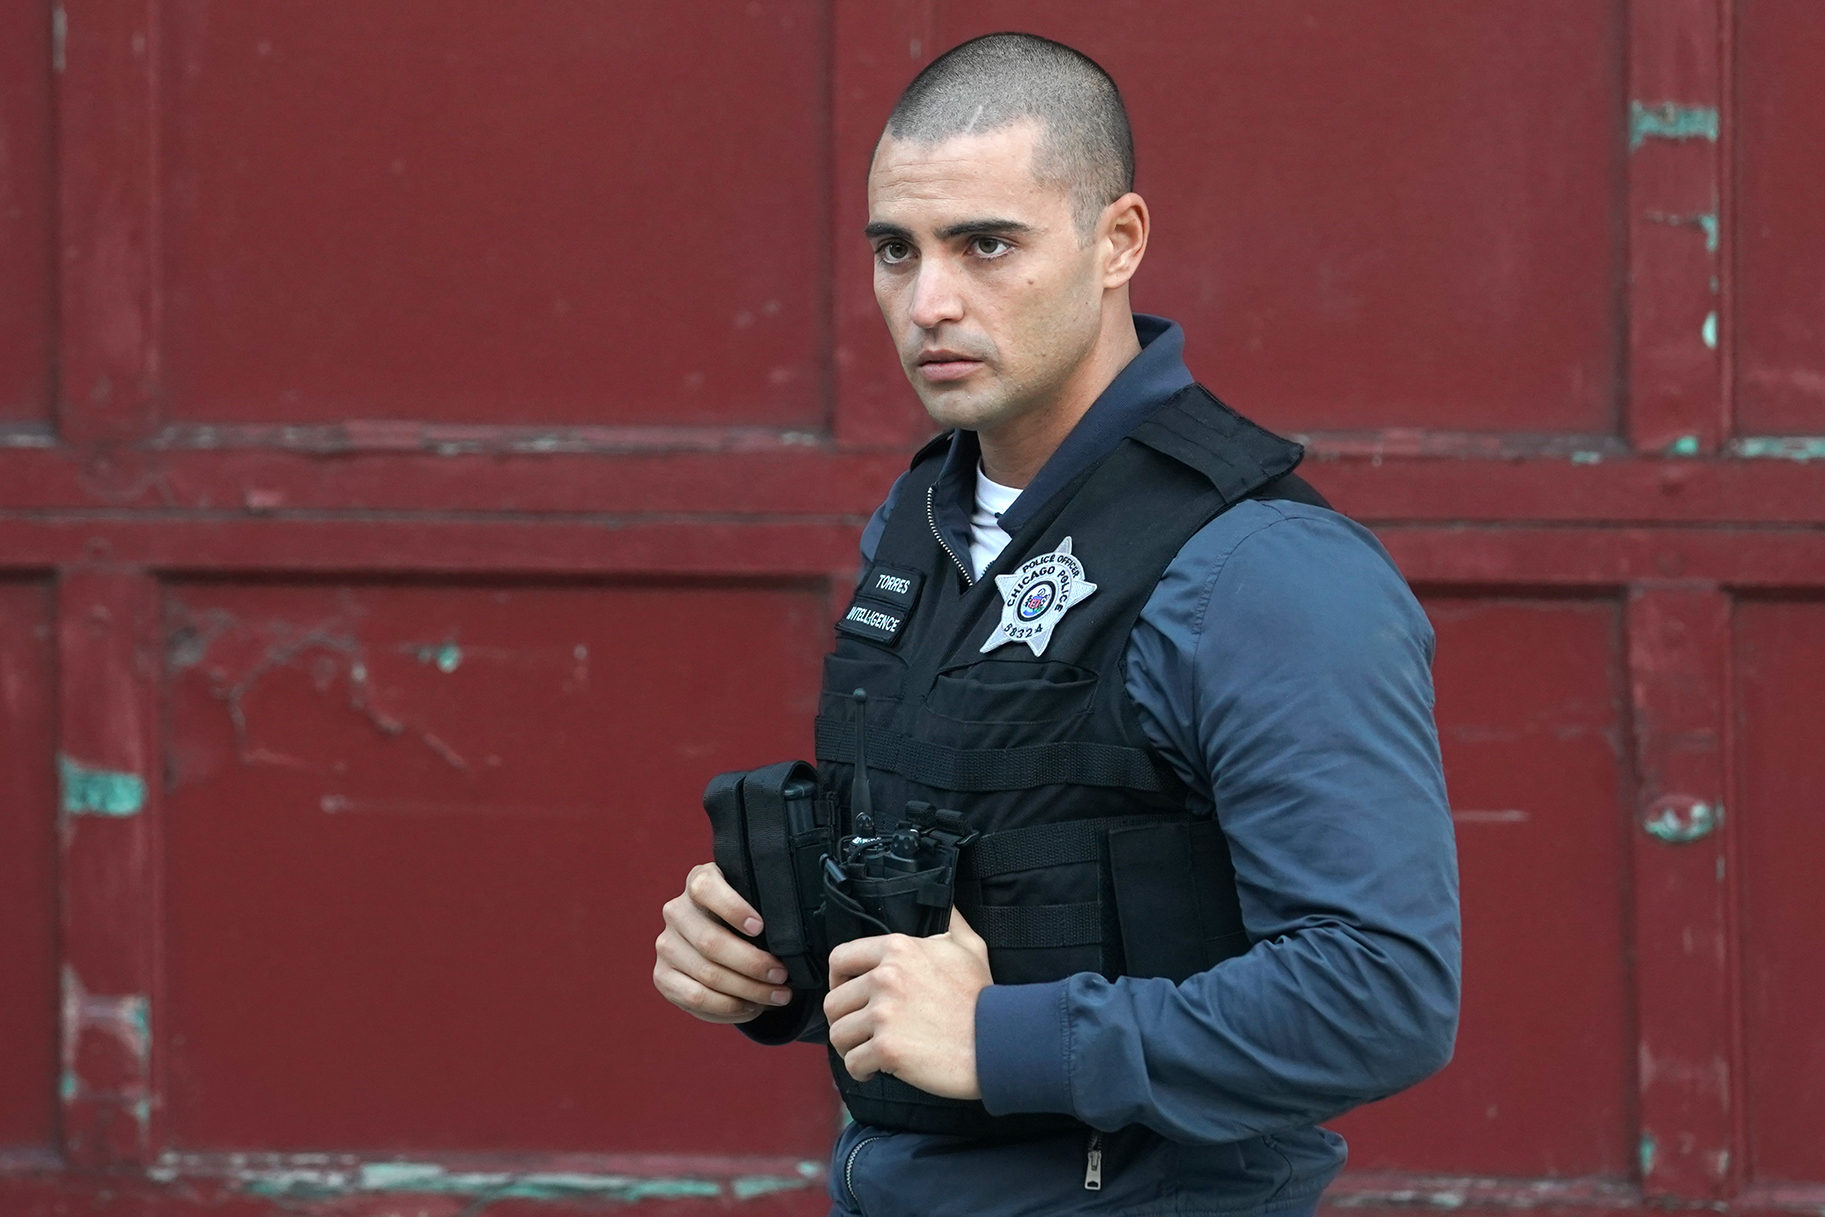 Torres on Chicago PD